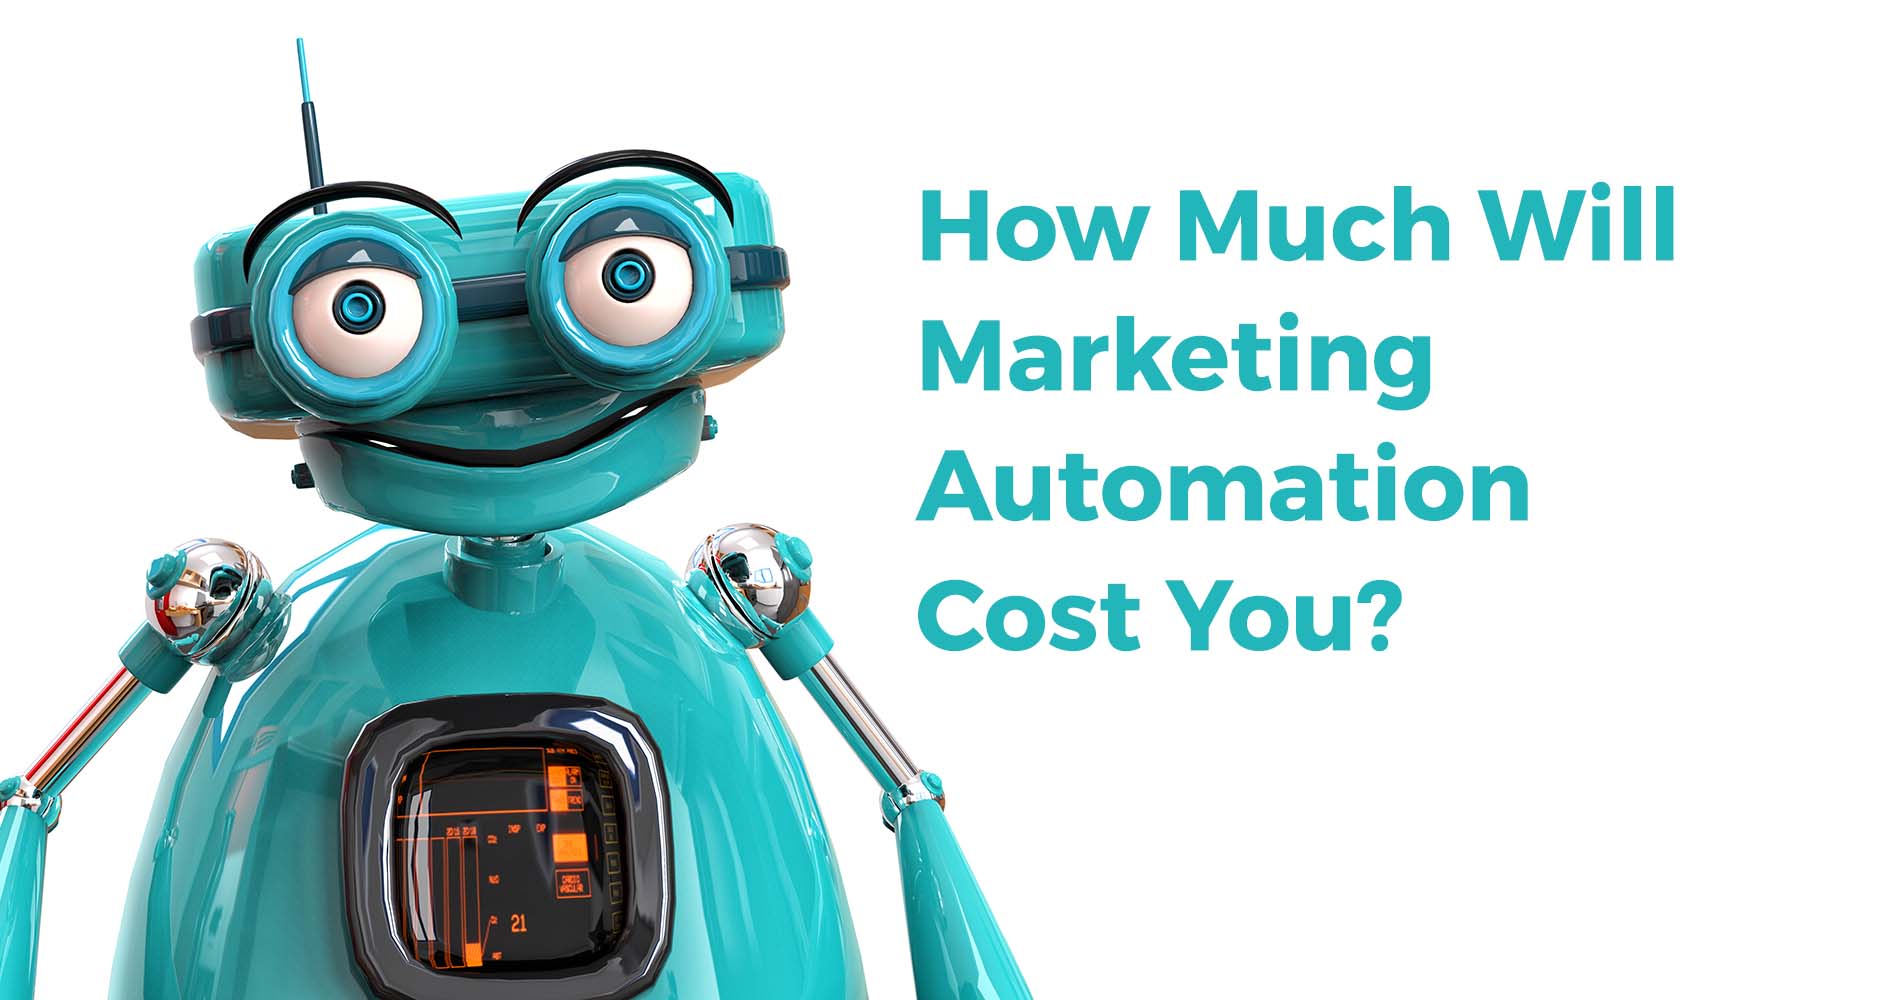 How Much Will Marketing Automation Cost You?